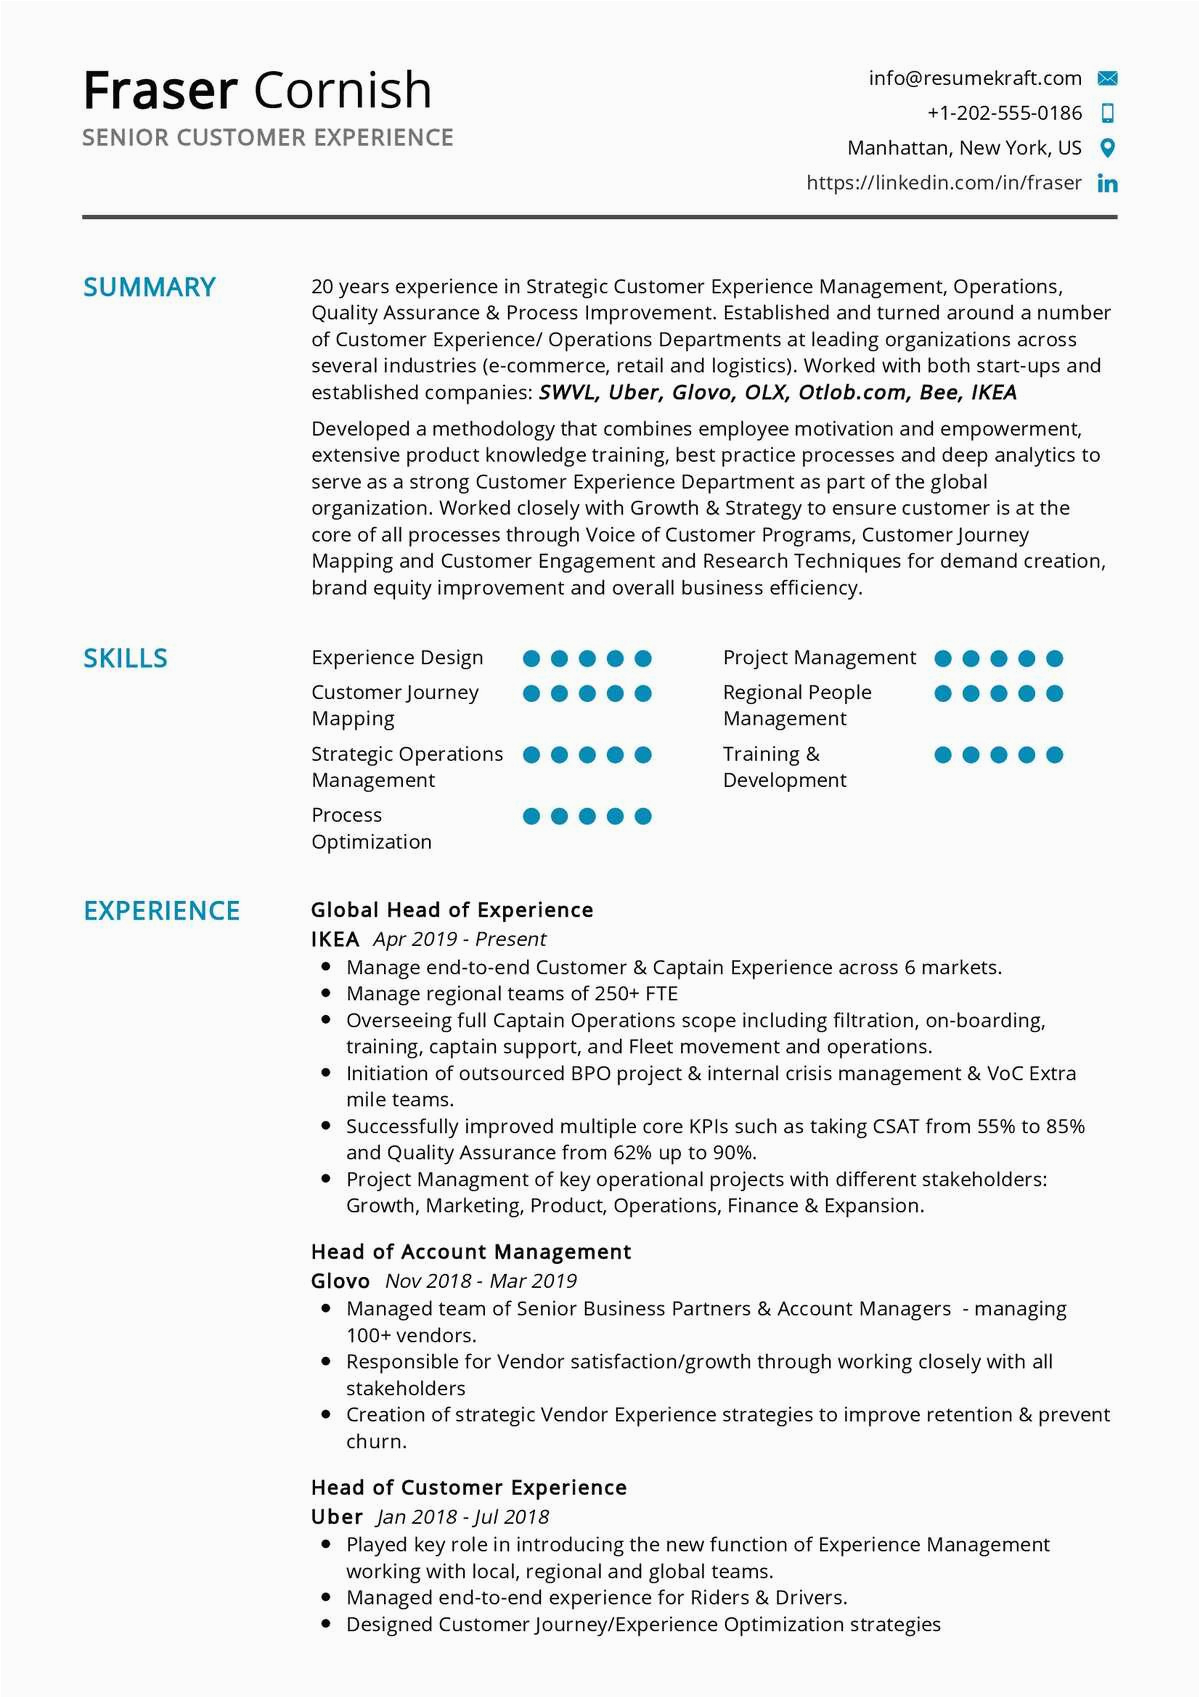 Resume Template for Lots Of Experience Senior Customer Experience Resume Sample 2021